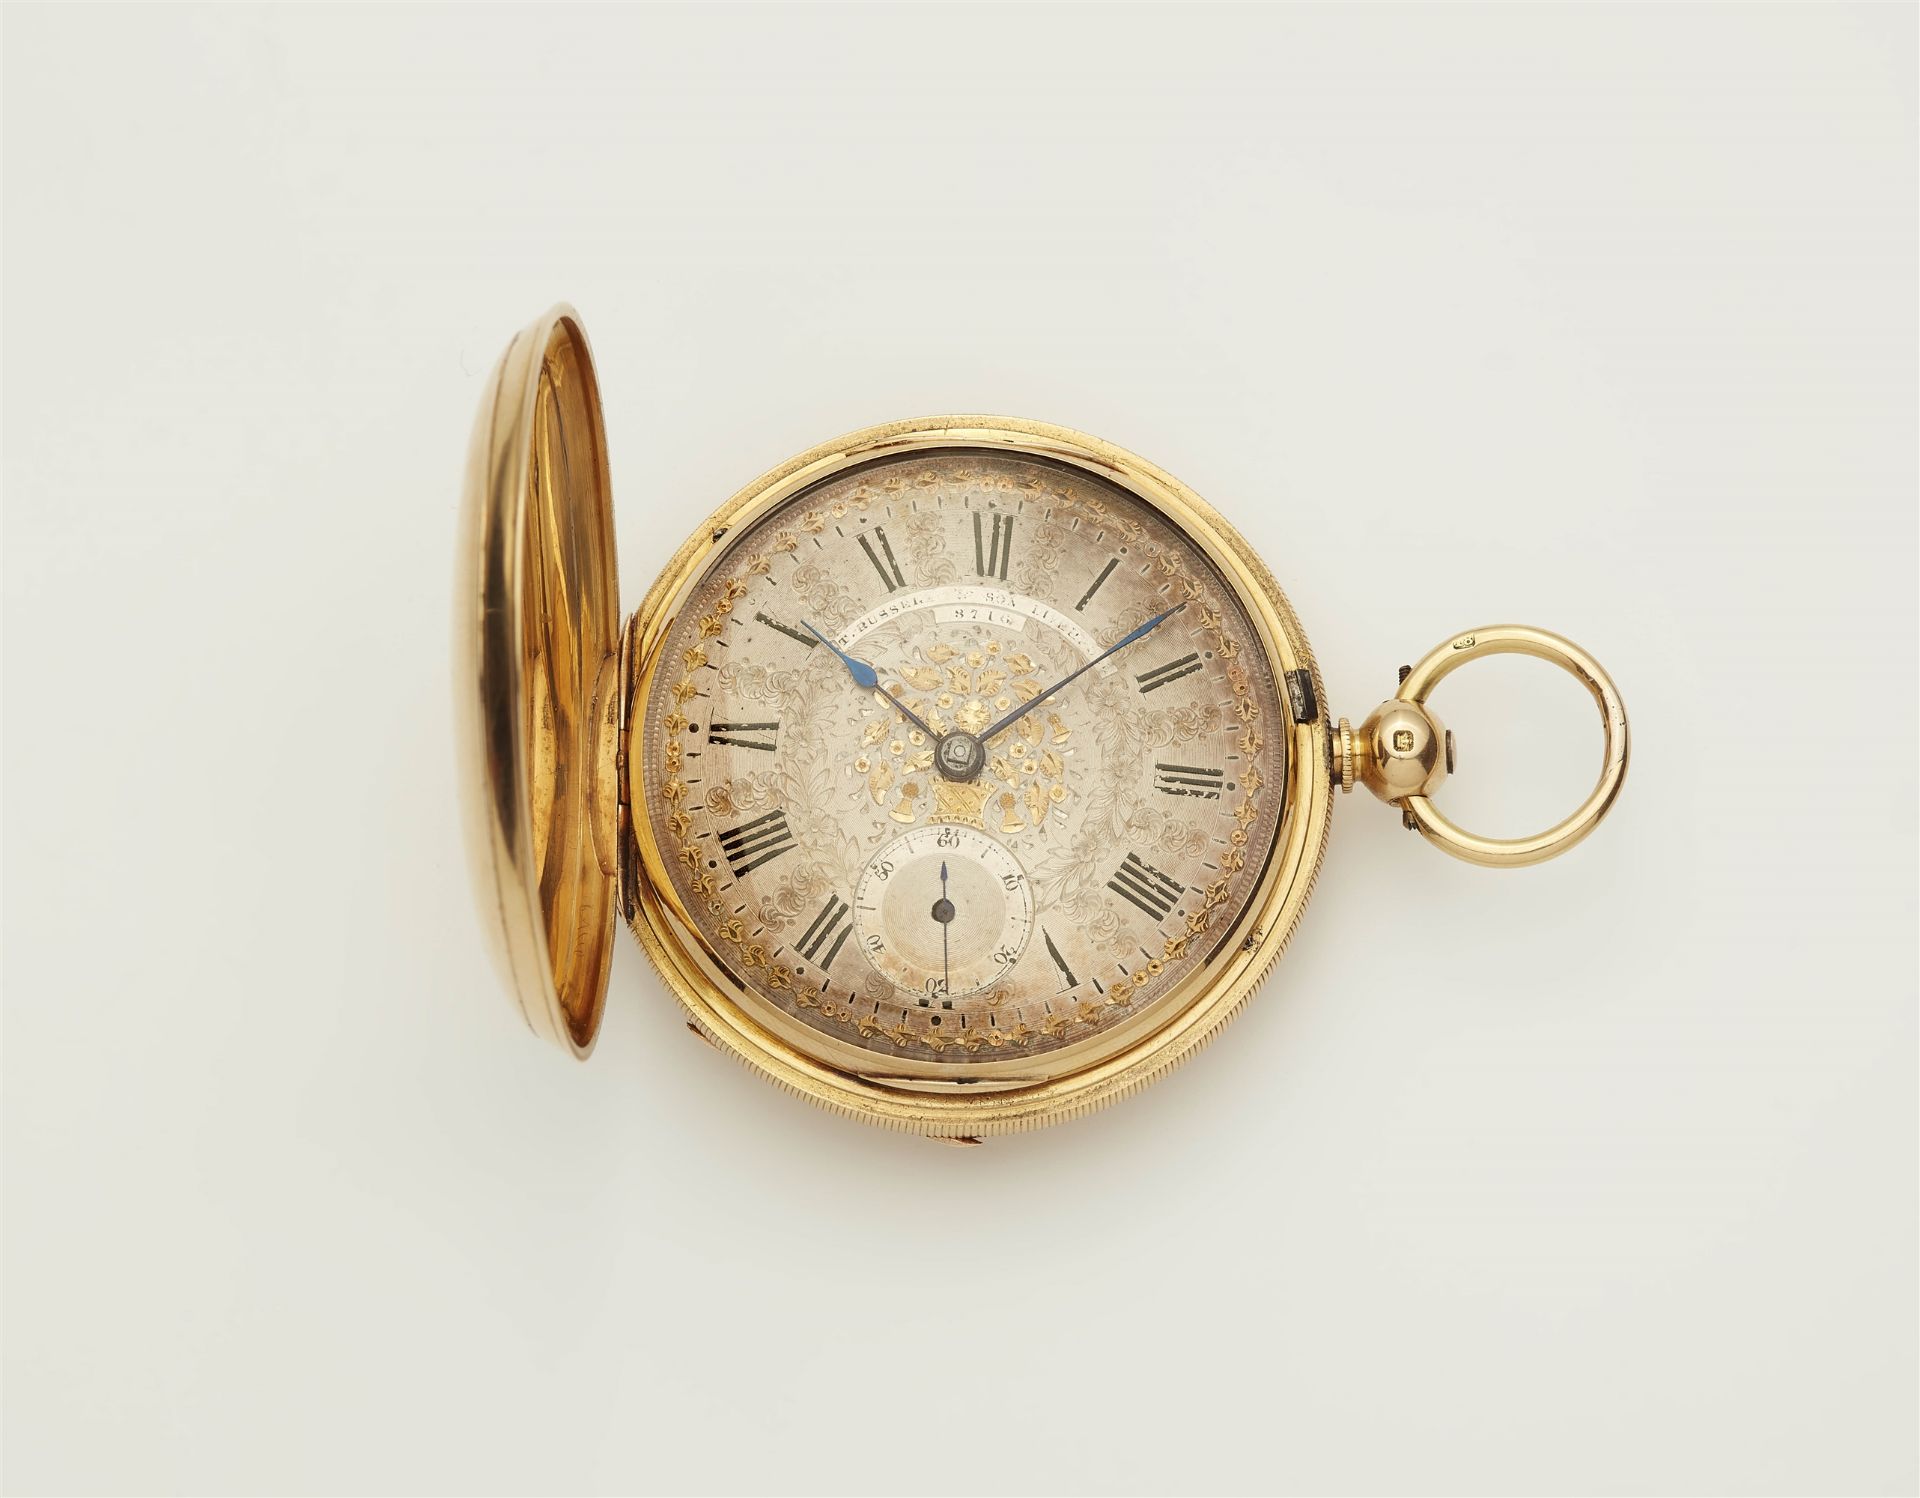 An 18k gold Thomas Russell & Son key wound savonette pocket watch.